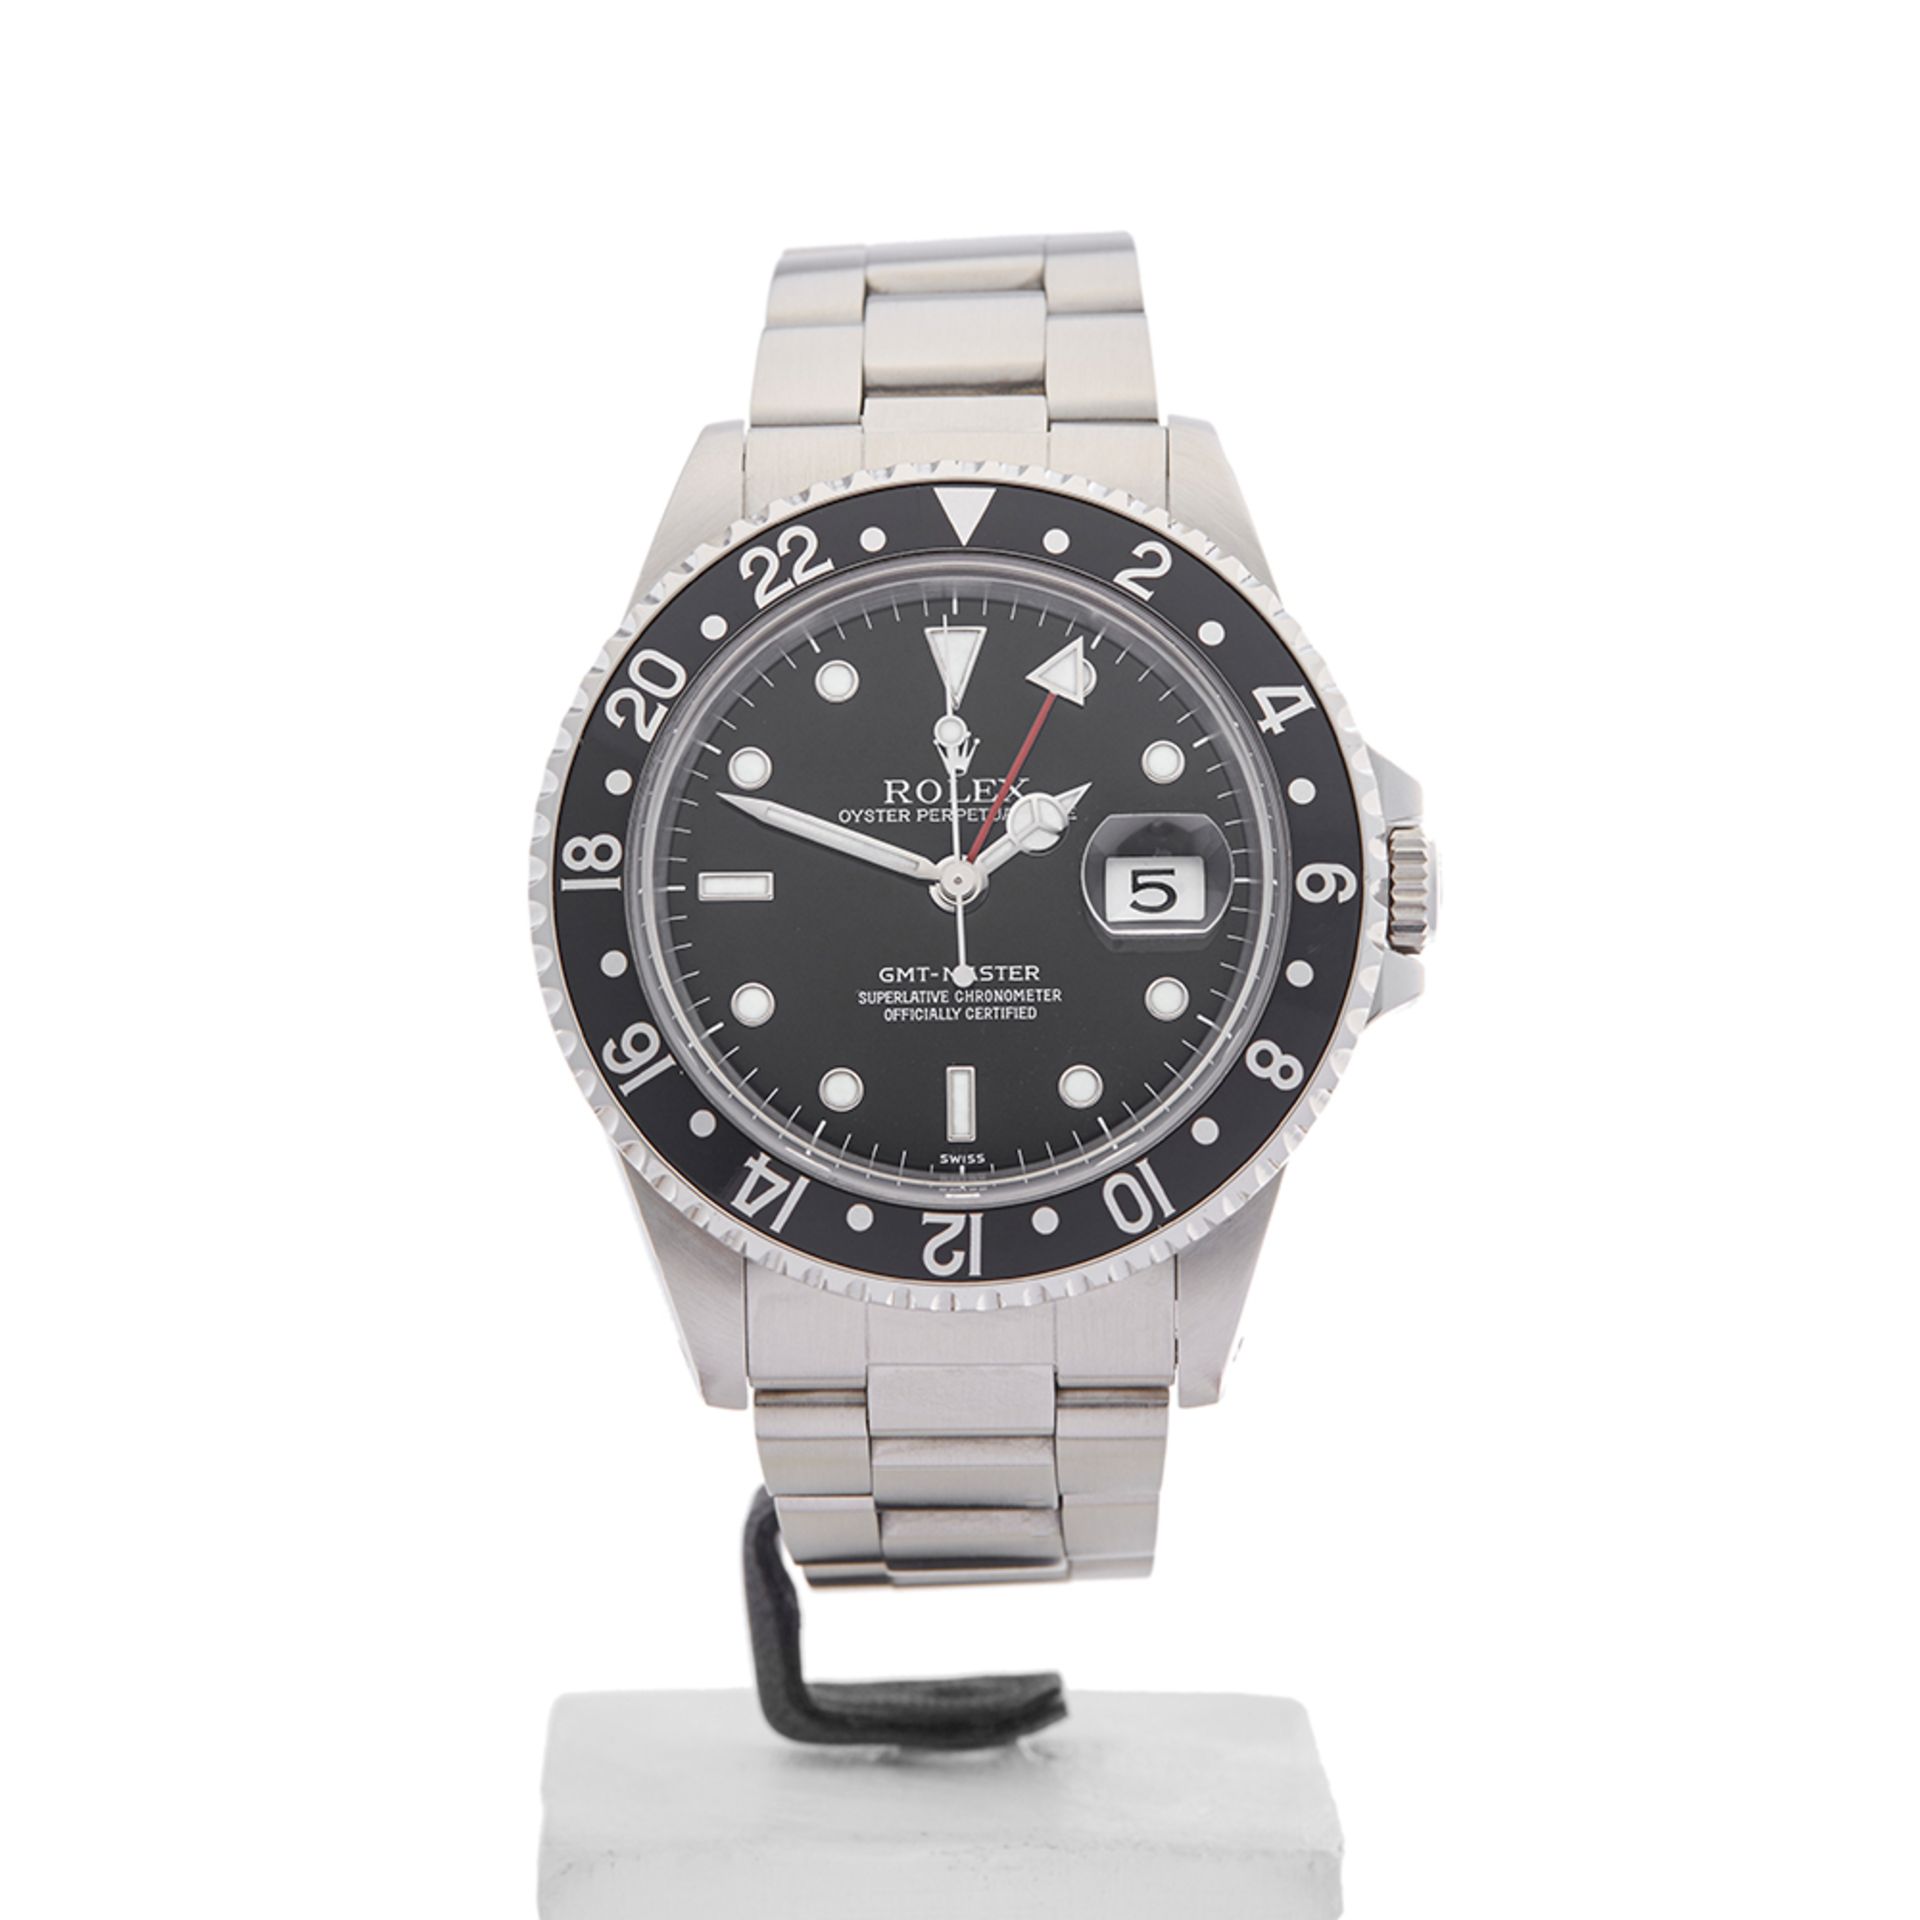 GMT-Master 40mm Stainless Steel 16700 - Image 2 of 9